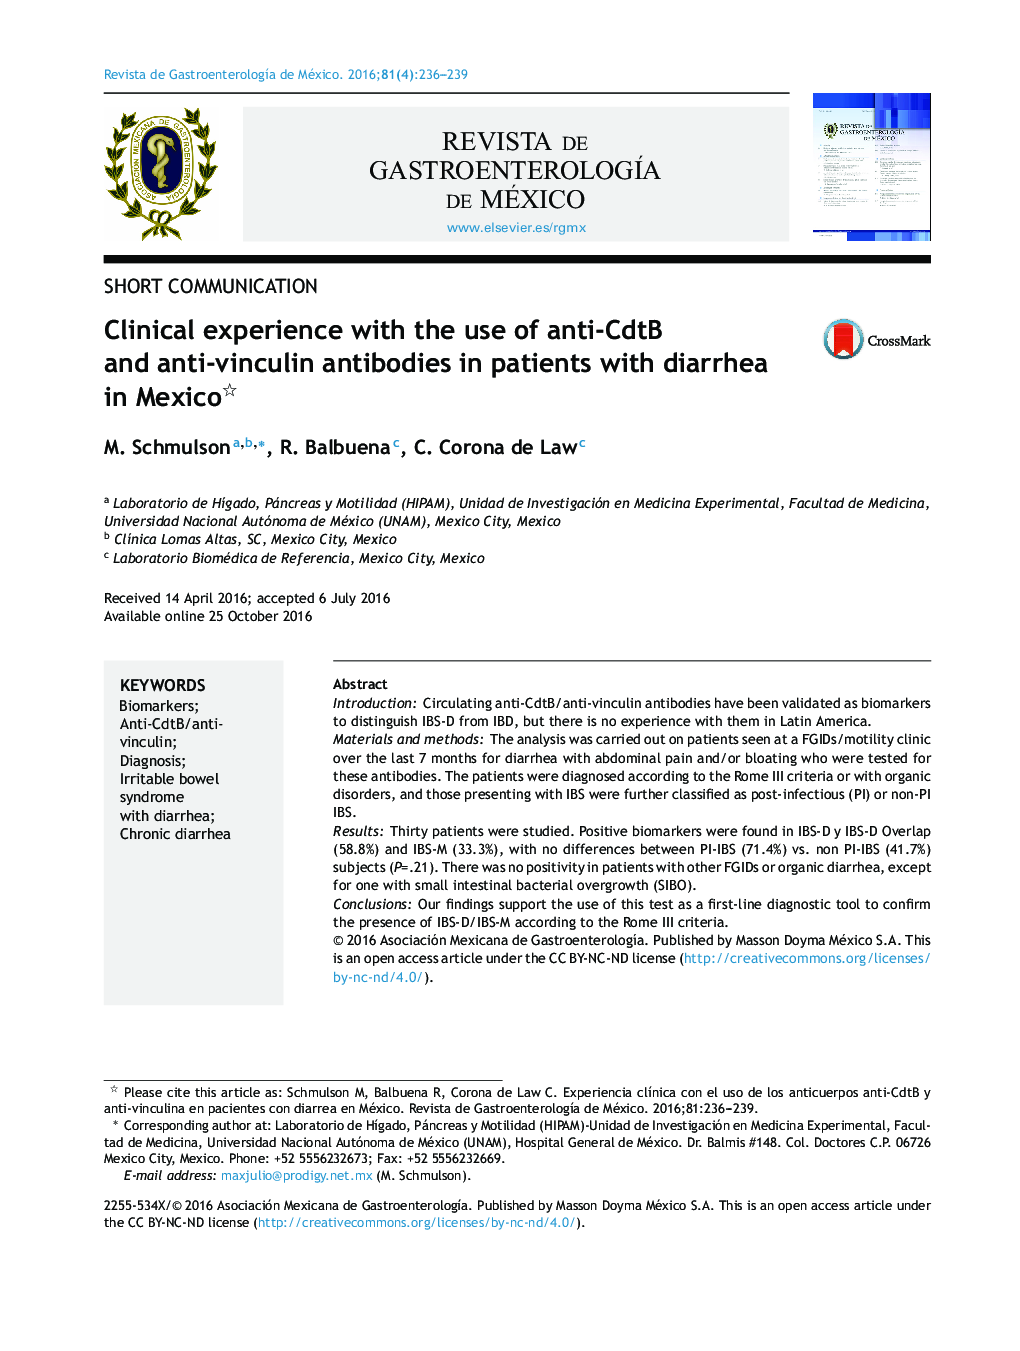 Clinical experience with the use of anti-CdtB and anti-vinculin antibodies in patients with diarrhea in Mexico